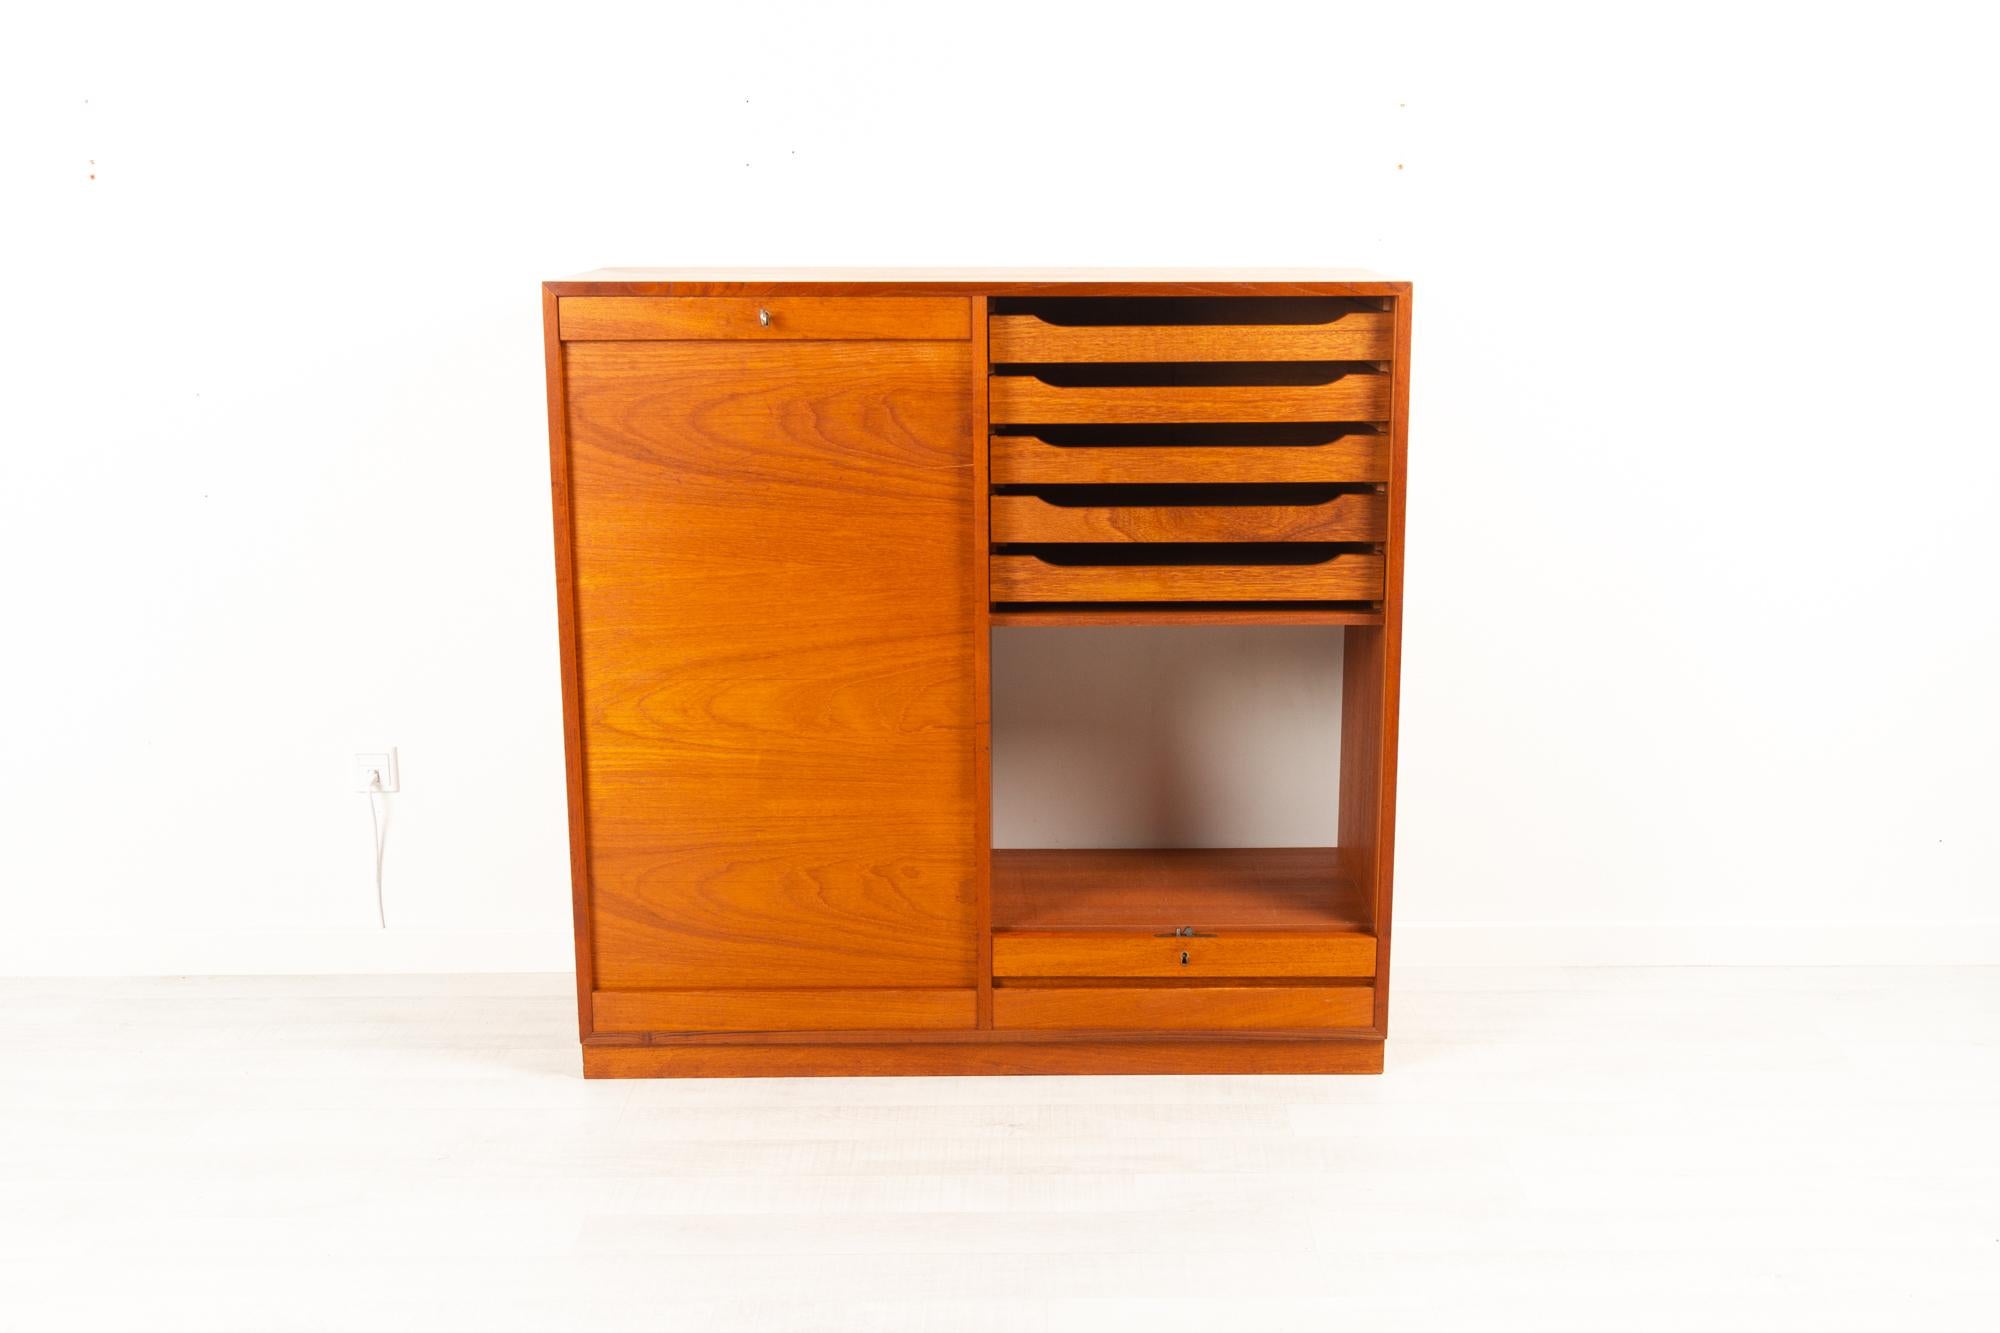 Vintage Danish teak cabinet with tambour front, 1960s
Danish modern large double filing cabinet with vertical sliding tambour doors in teak. Two separate compartments each with five drawers and open shelf. Drawers in solid wood with dovetail